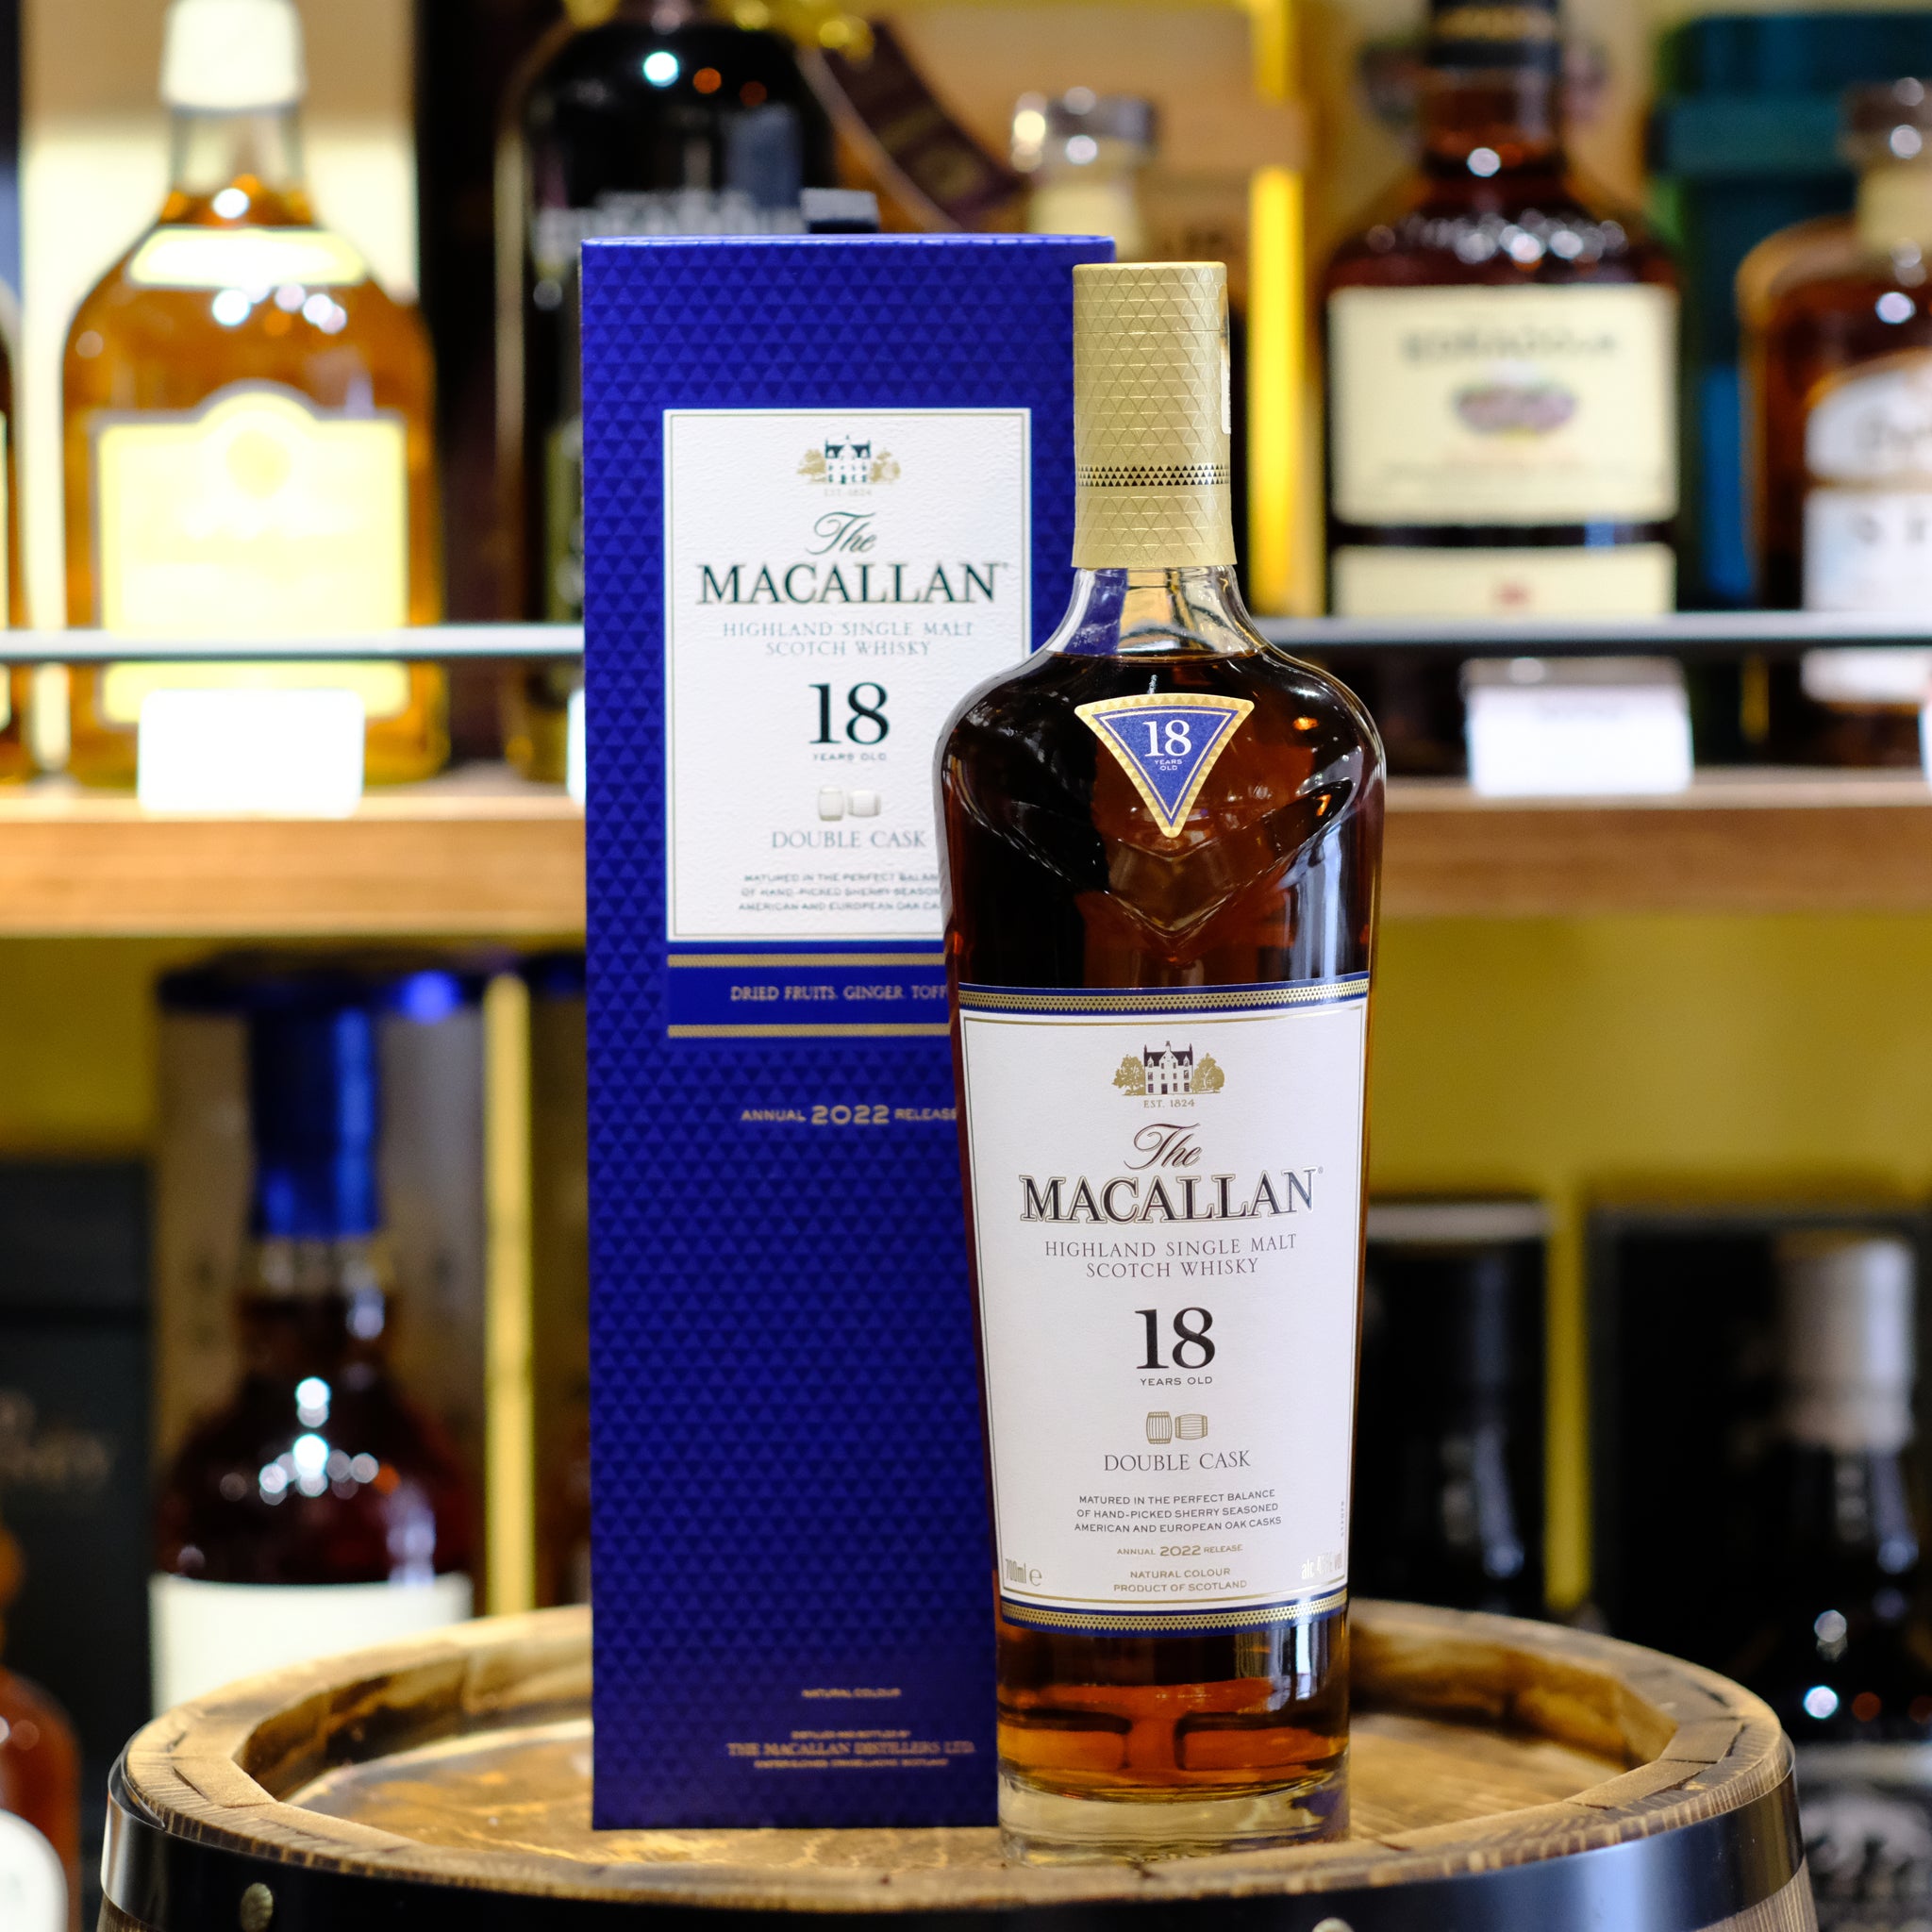 The Macallan 18 Year Old Double Cask Single Malt Scotch Whisky (2022 Release)